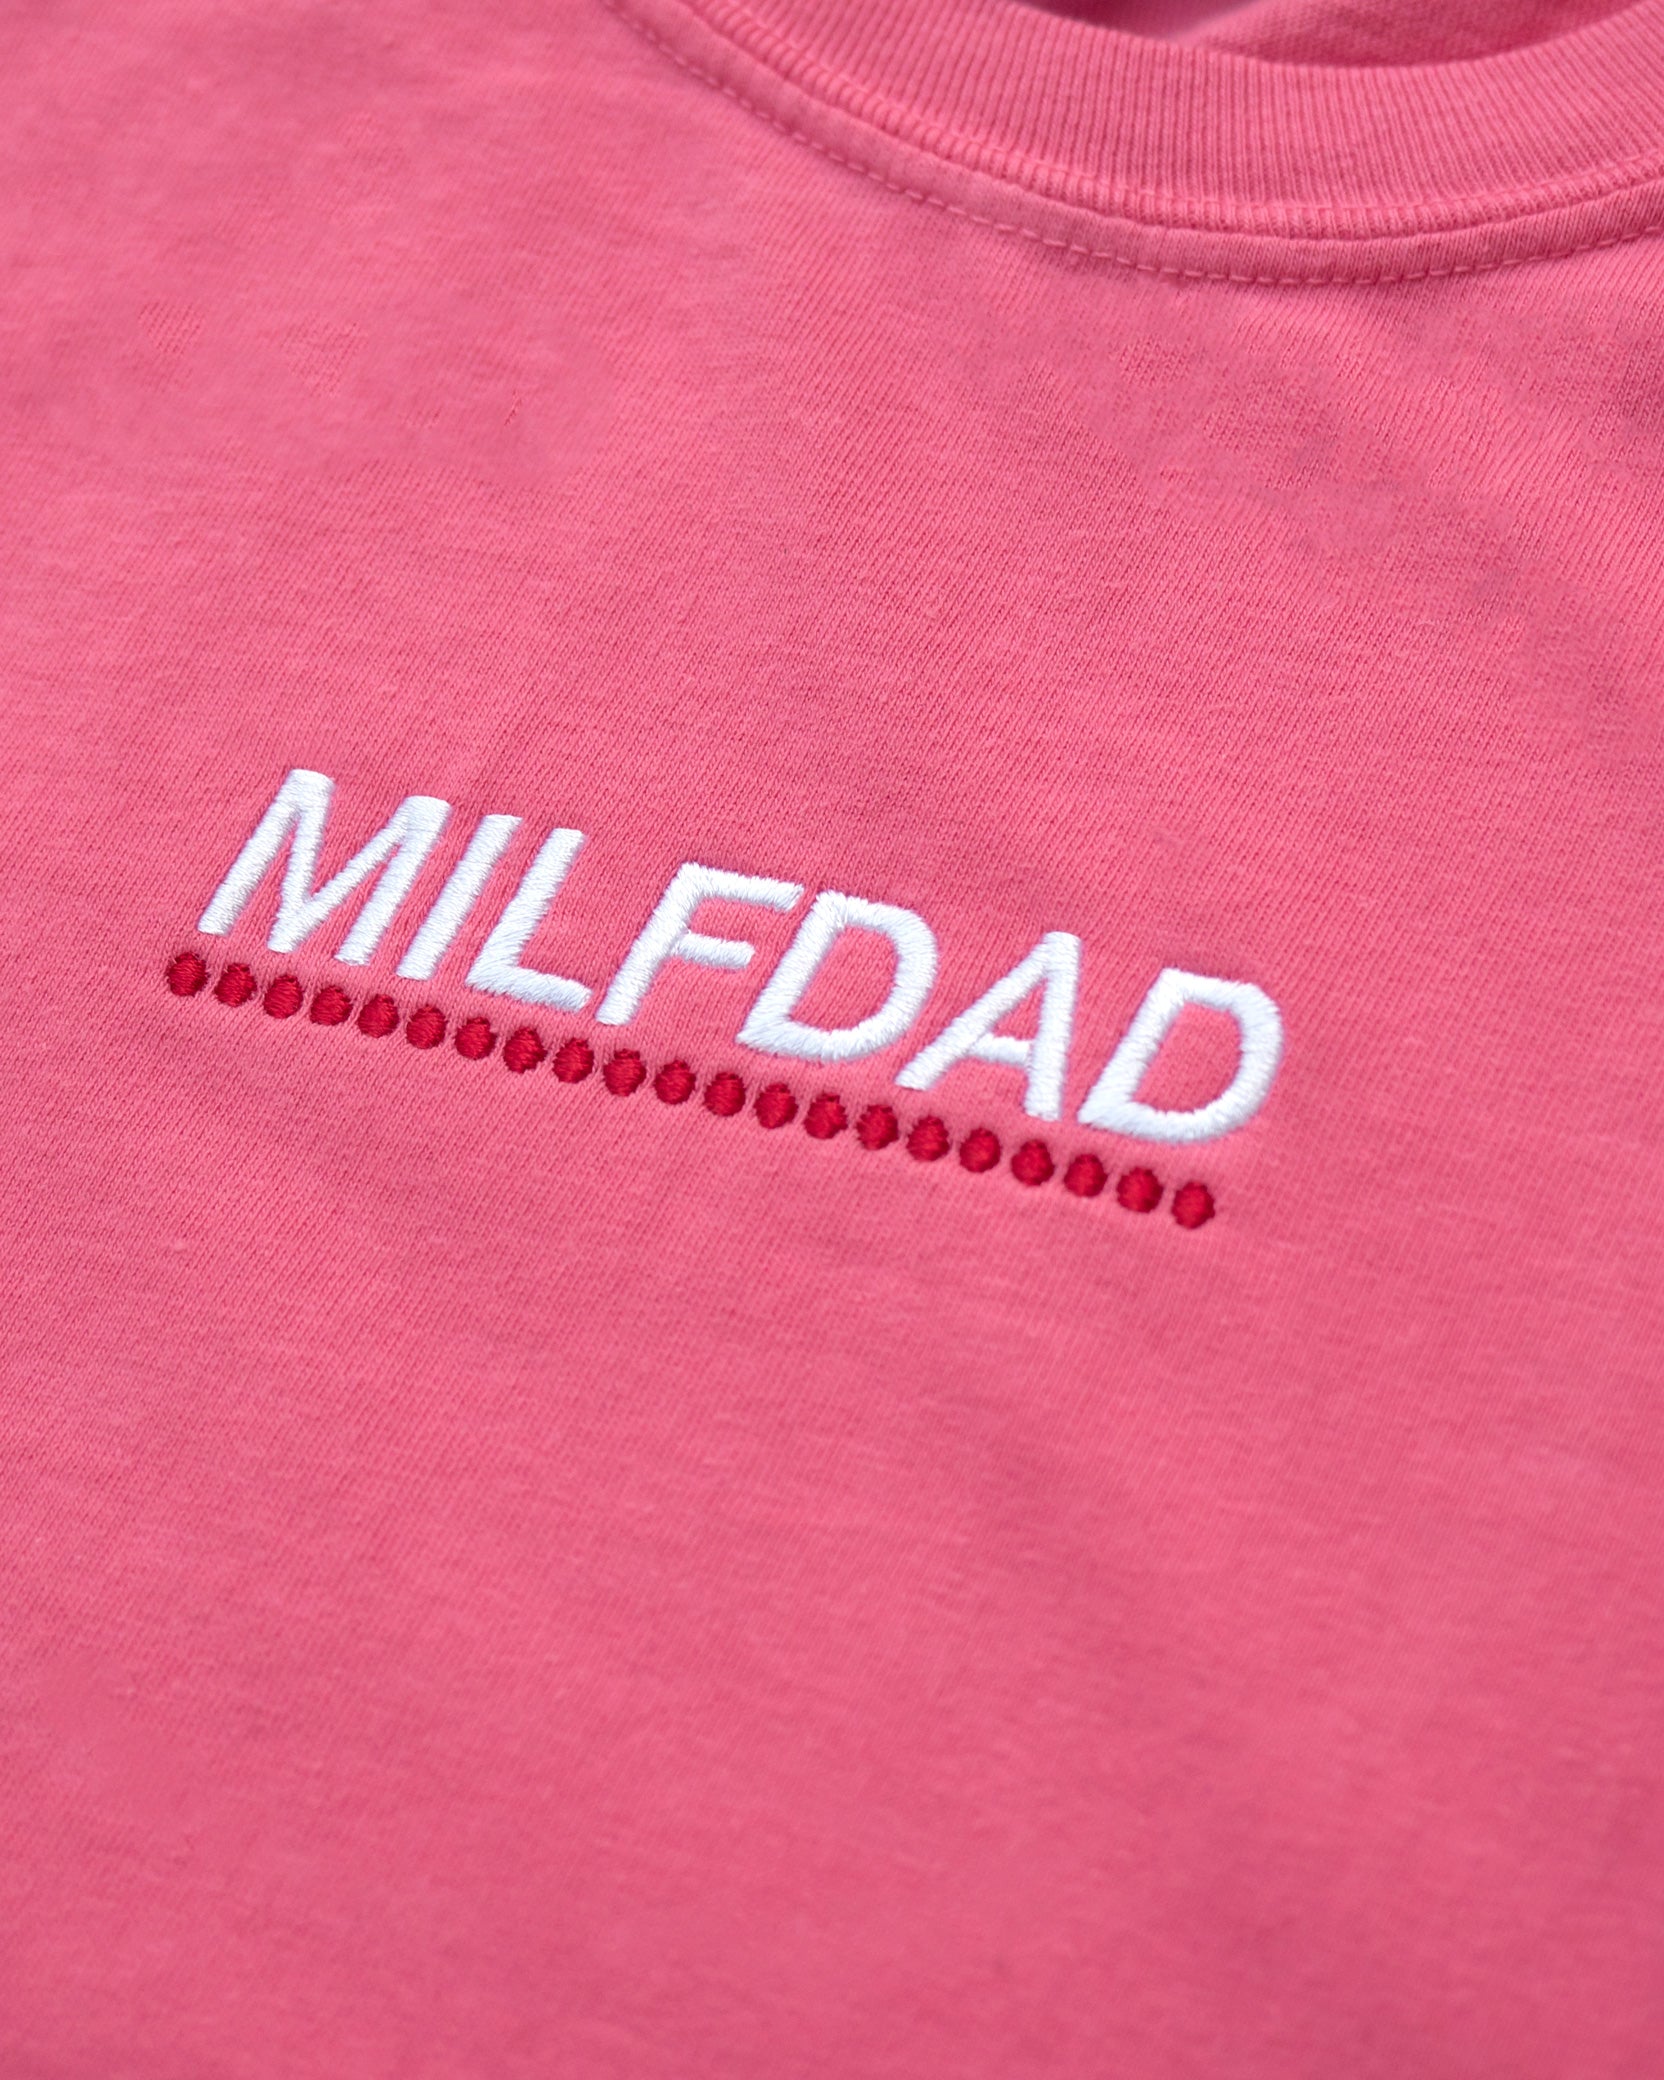 Embroidery Logo Tee - Pink